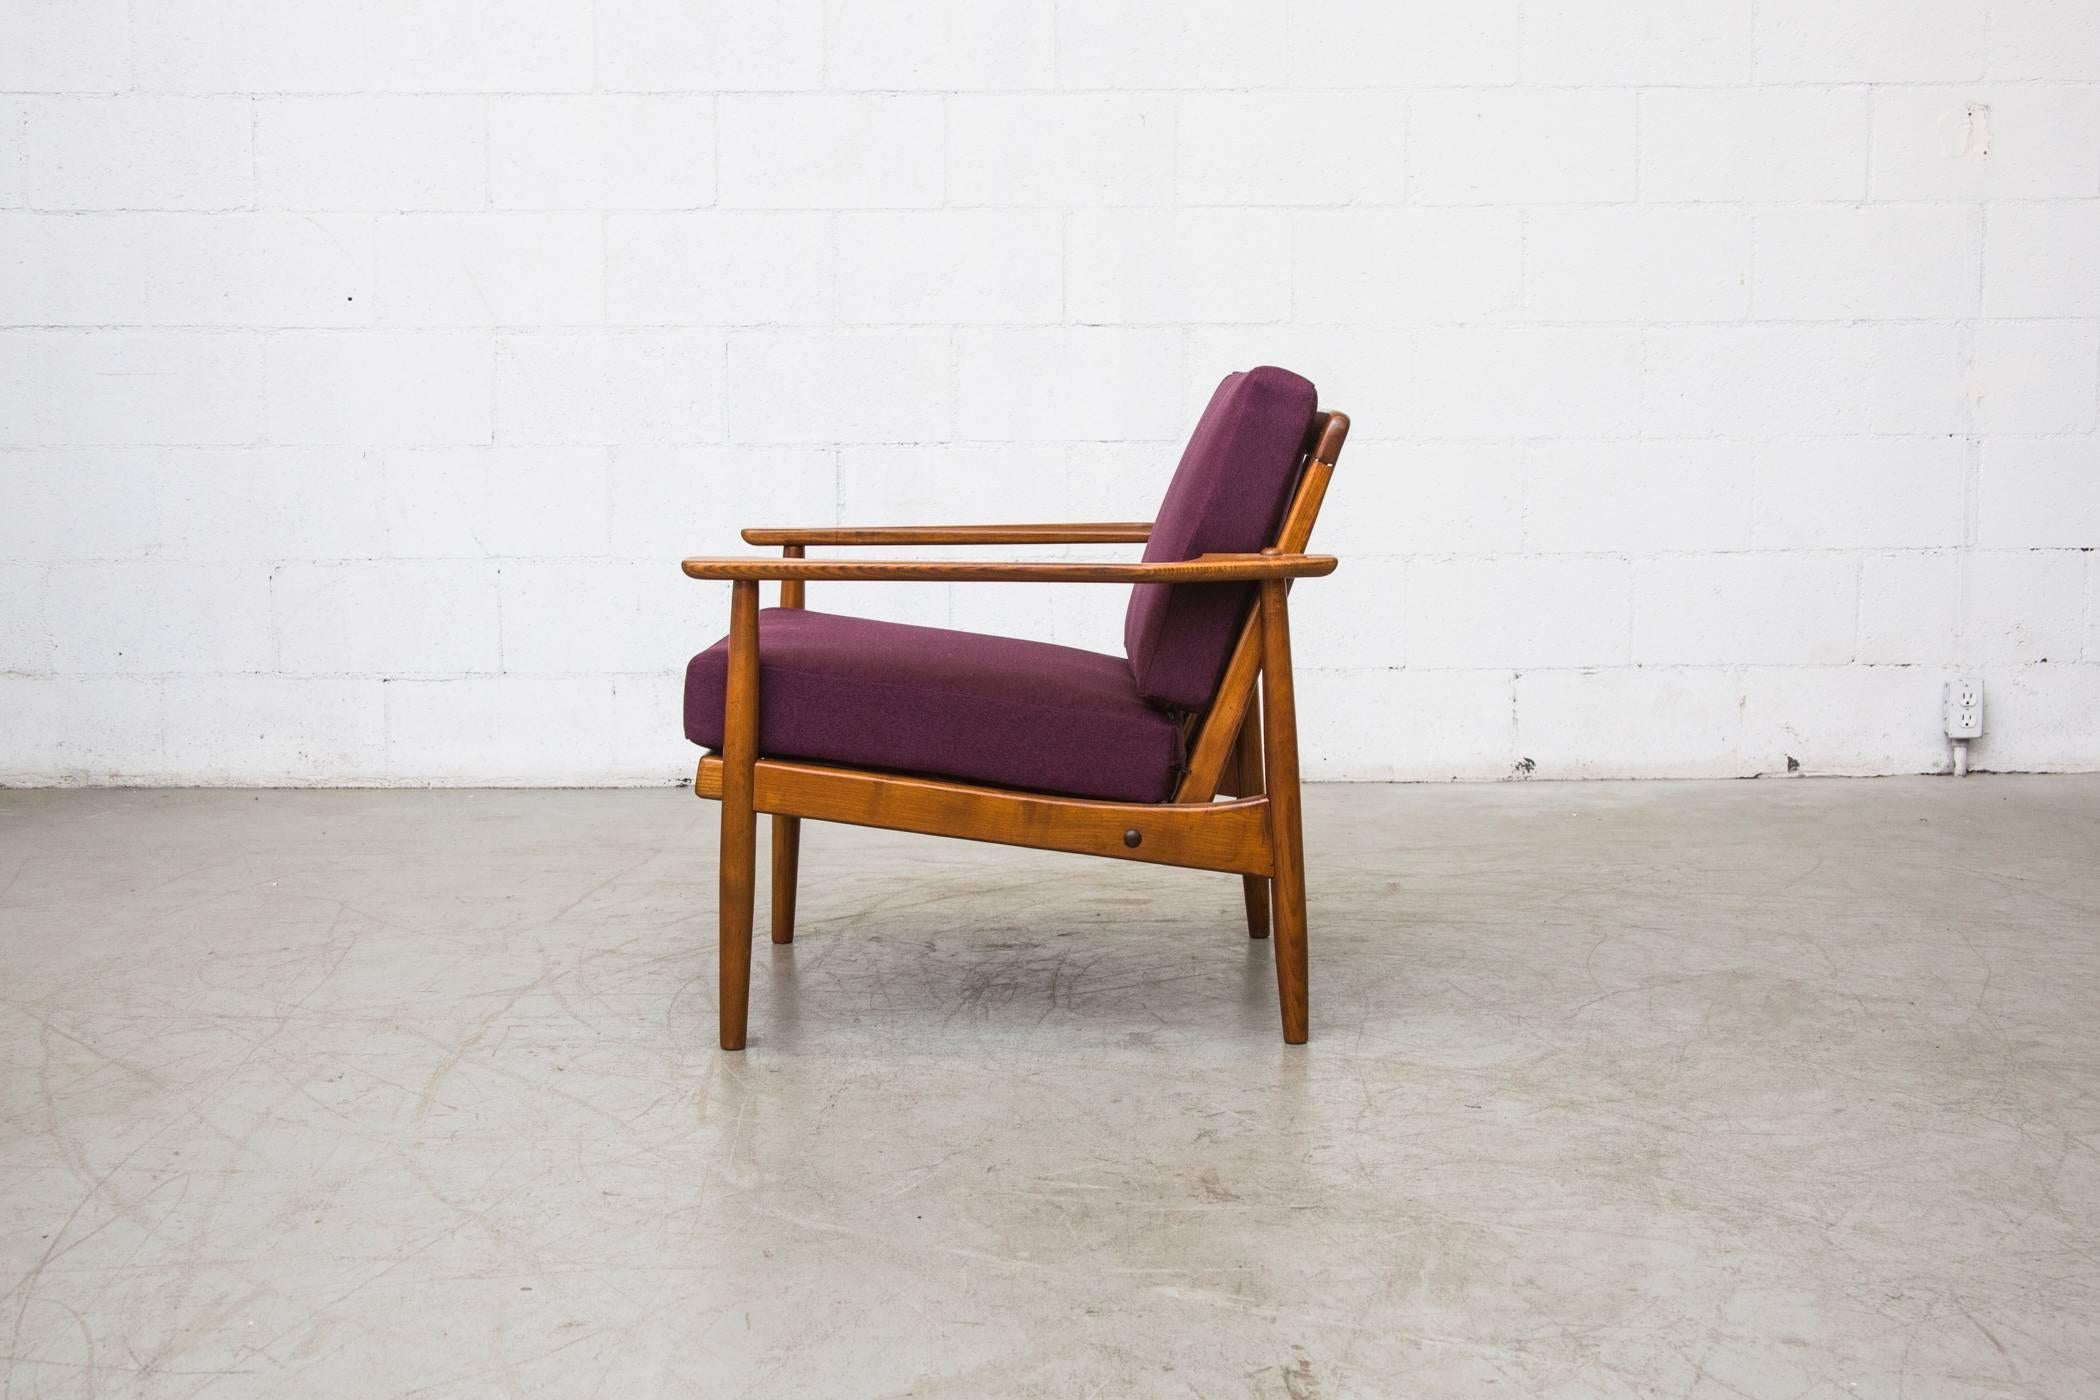 Dutch Mid-Century Modern Lounge Chair in Grape with Slat Back